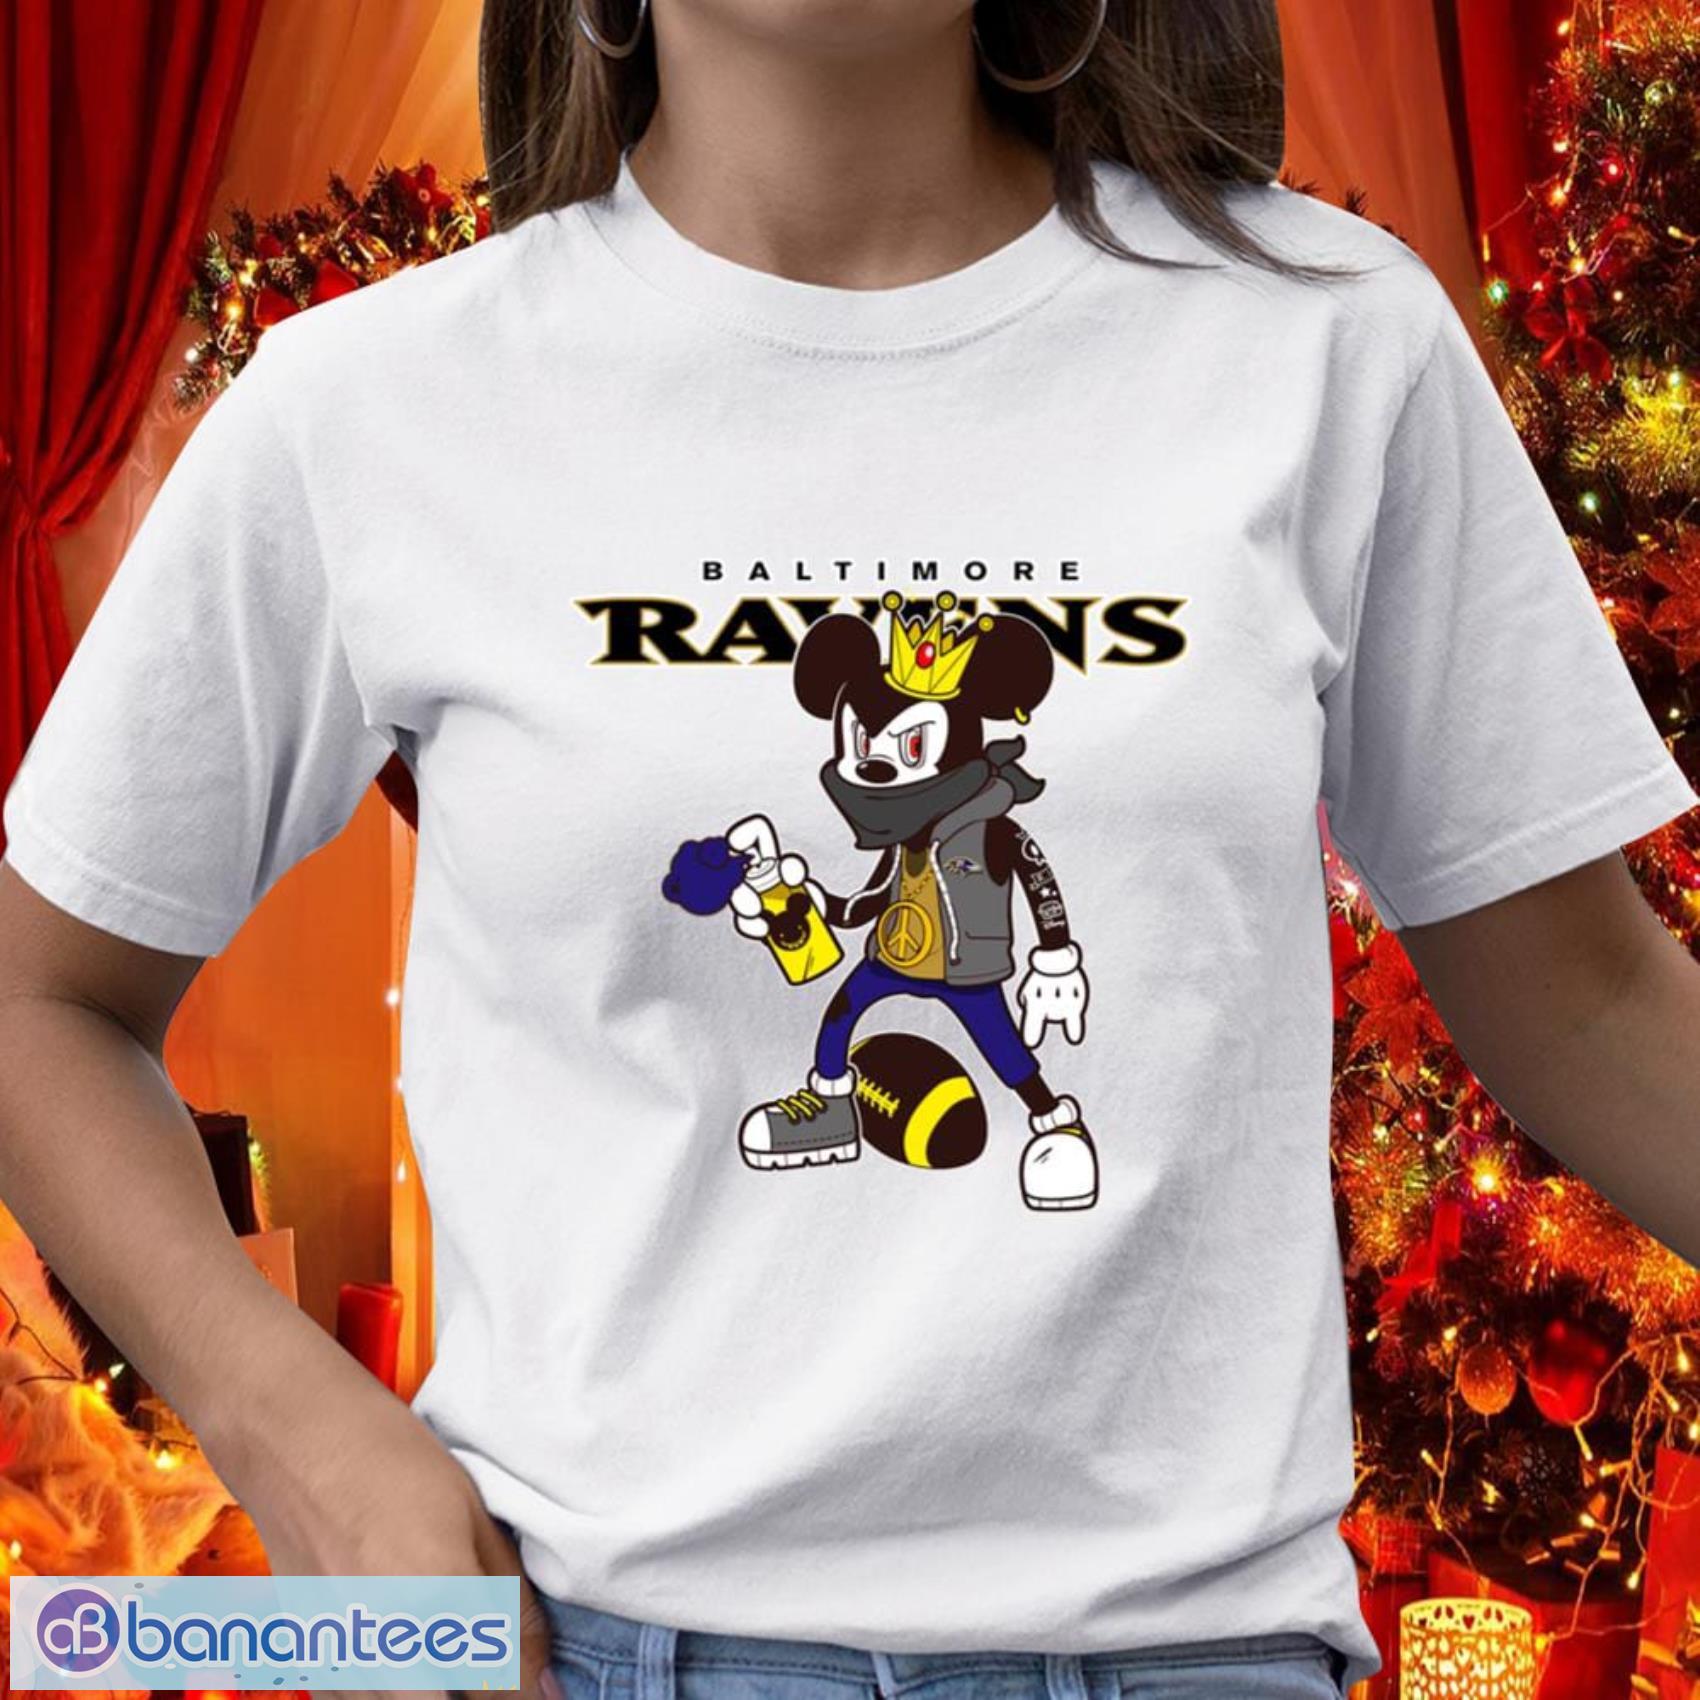 Baltimore Ravens NFL Football Gift Fr Fans Mickey Peace Sign Sports T Shirt - Baltimore Ravens NFL Football Mickey Peace Sign Sports T Shirt_1